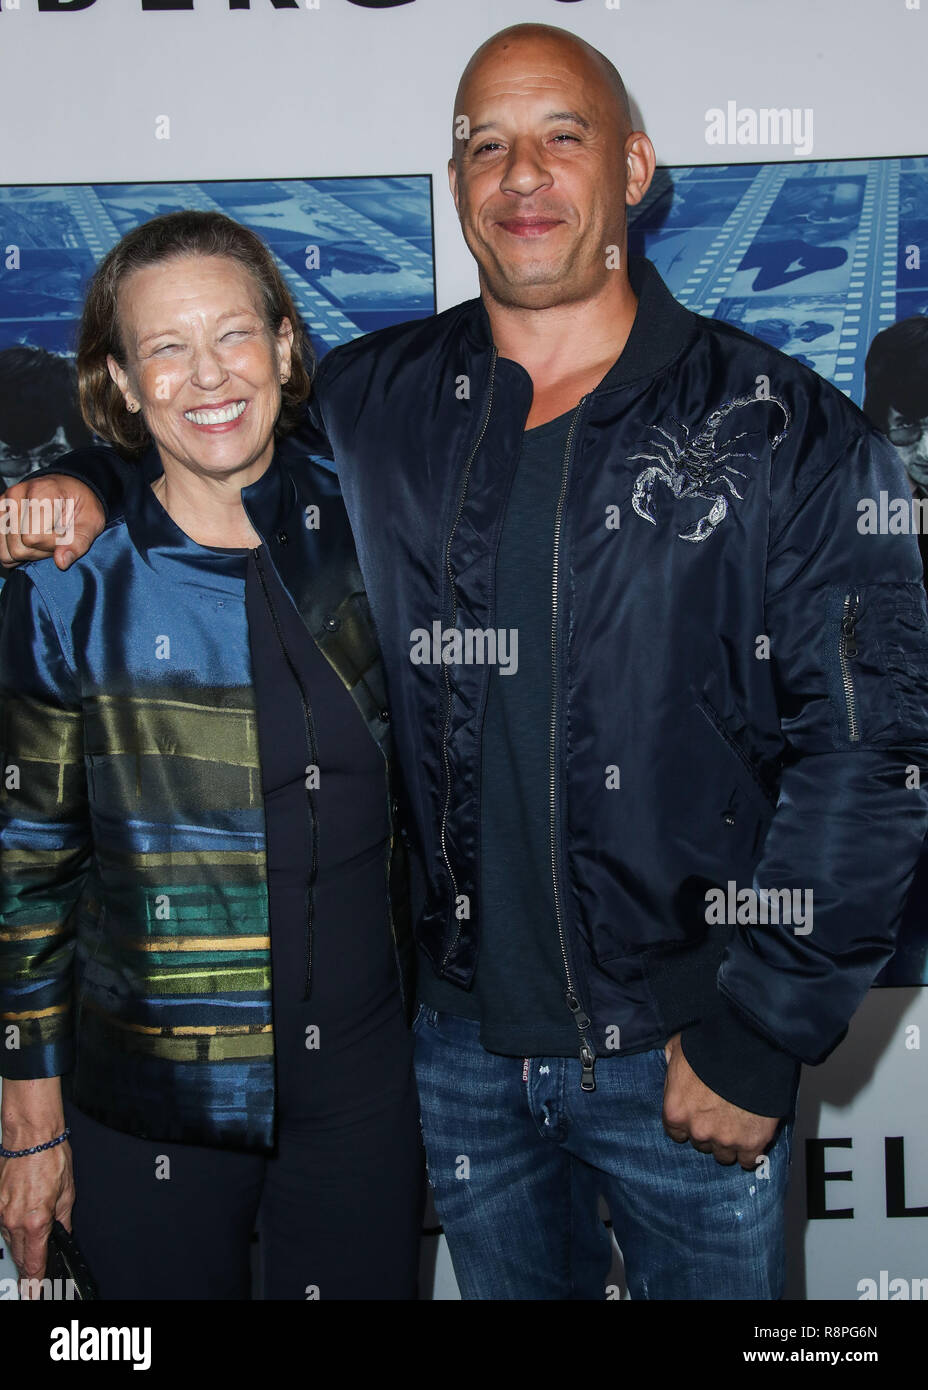 HOLLYWOOD, LOS ANGELES, CA, USA - SEPTEMBER 26: Delora Vincent, Vin Diesel arrive at the Los Angeles Premiere Of HBO's 'Spielberg' held at Paramount Studios on September 26, 2017 in Hollywood, Los Angeles, California, United States. (Photo by Xavier Collin/Image Press Agency) Stock Photo